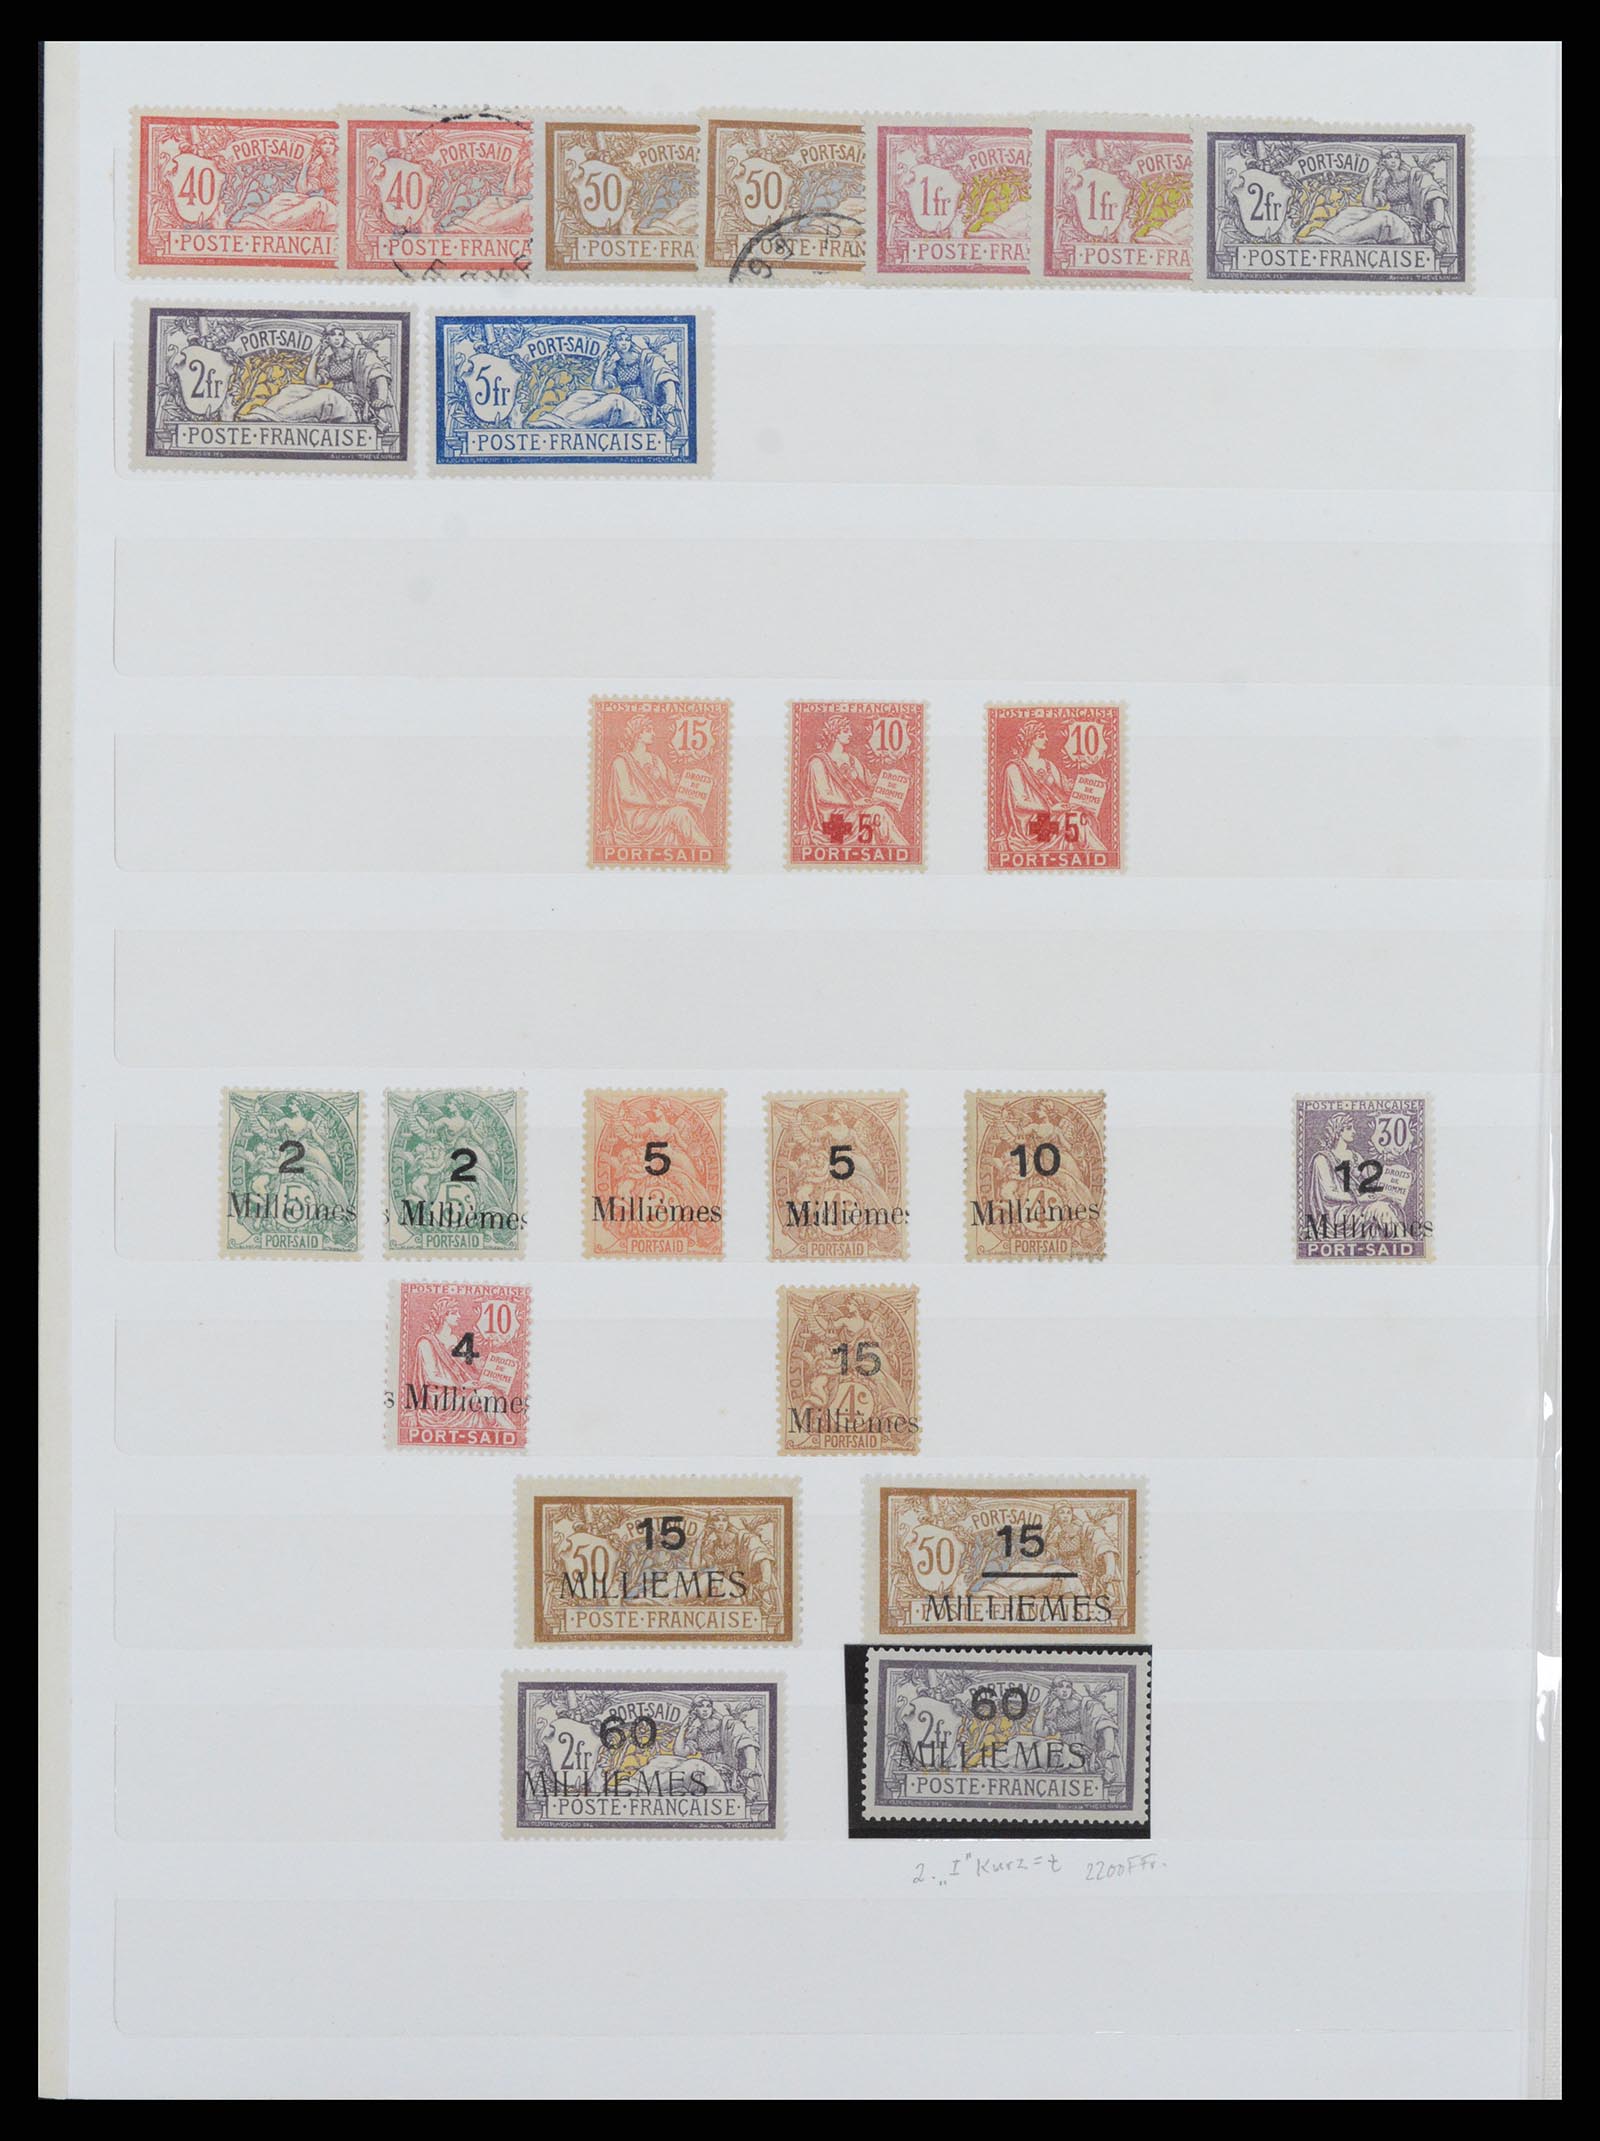 37523 005 - Stamp collection 37523 Offices abroad of France 1899-1930.